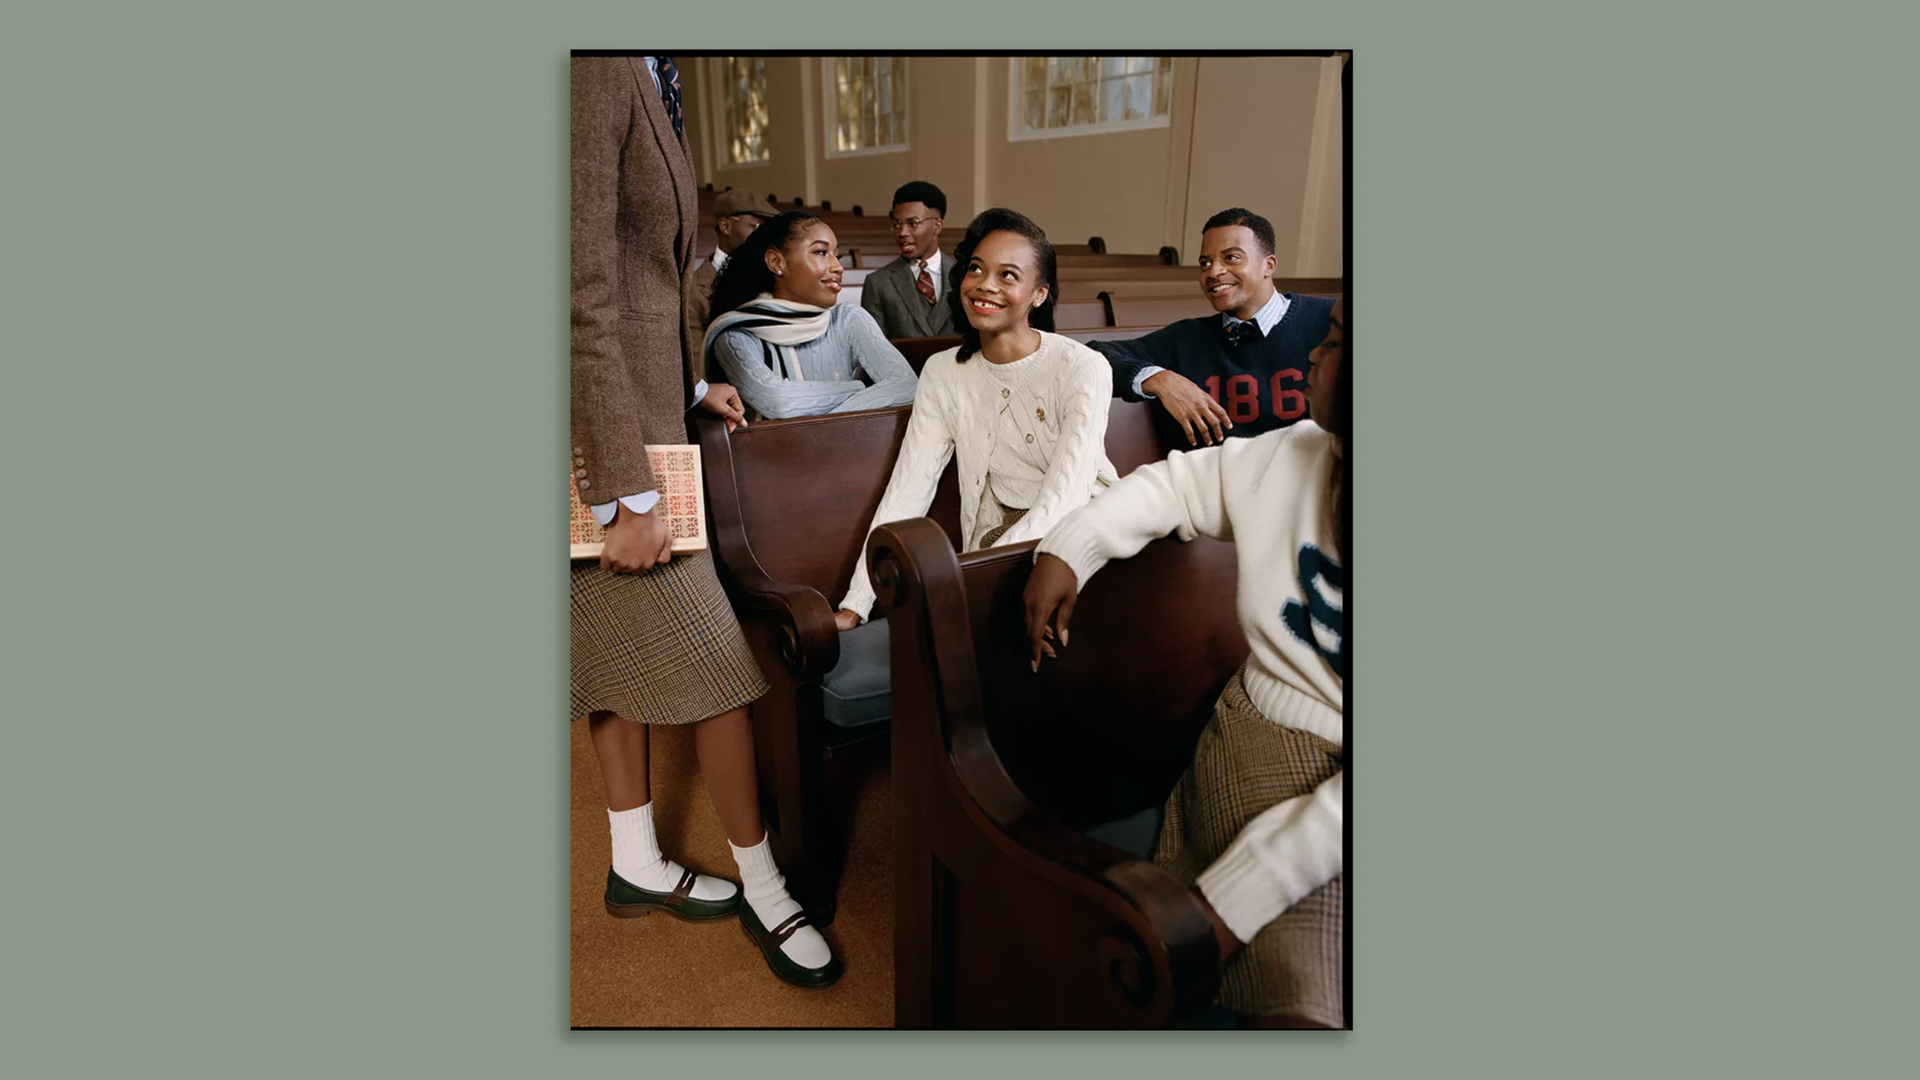 Students sit in pews wearing fashion from the 1920-50s designed by Ralph Lauren to honor Morehouse and Spelman